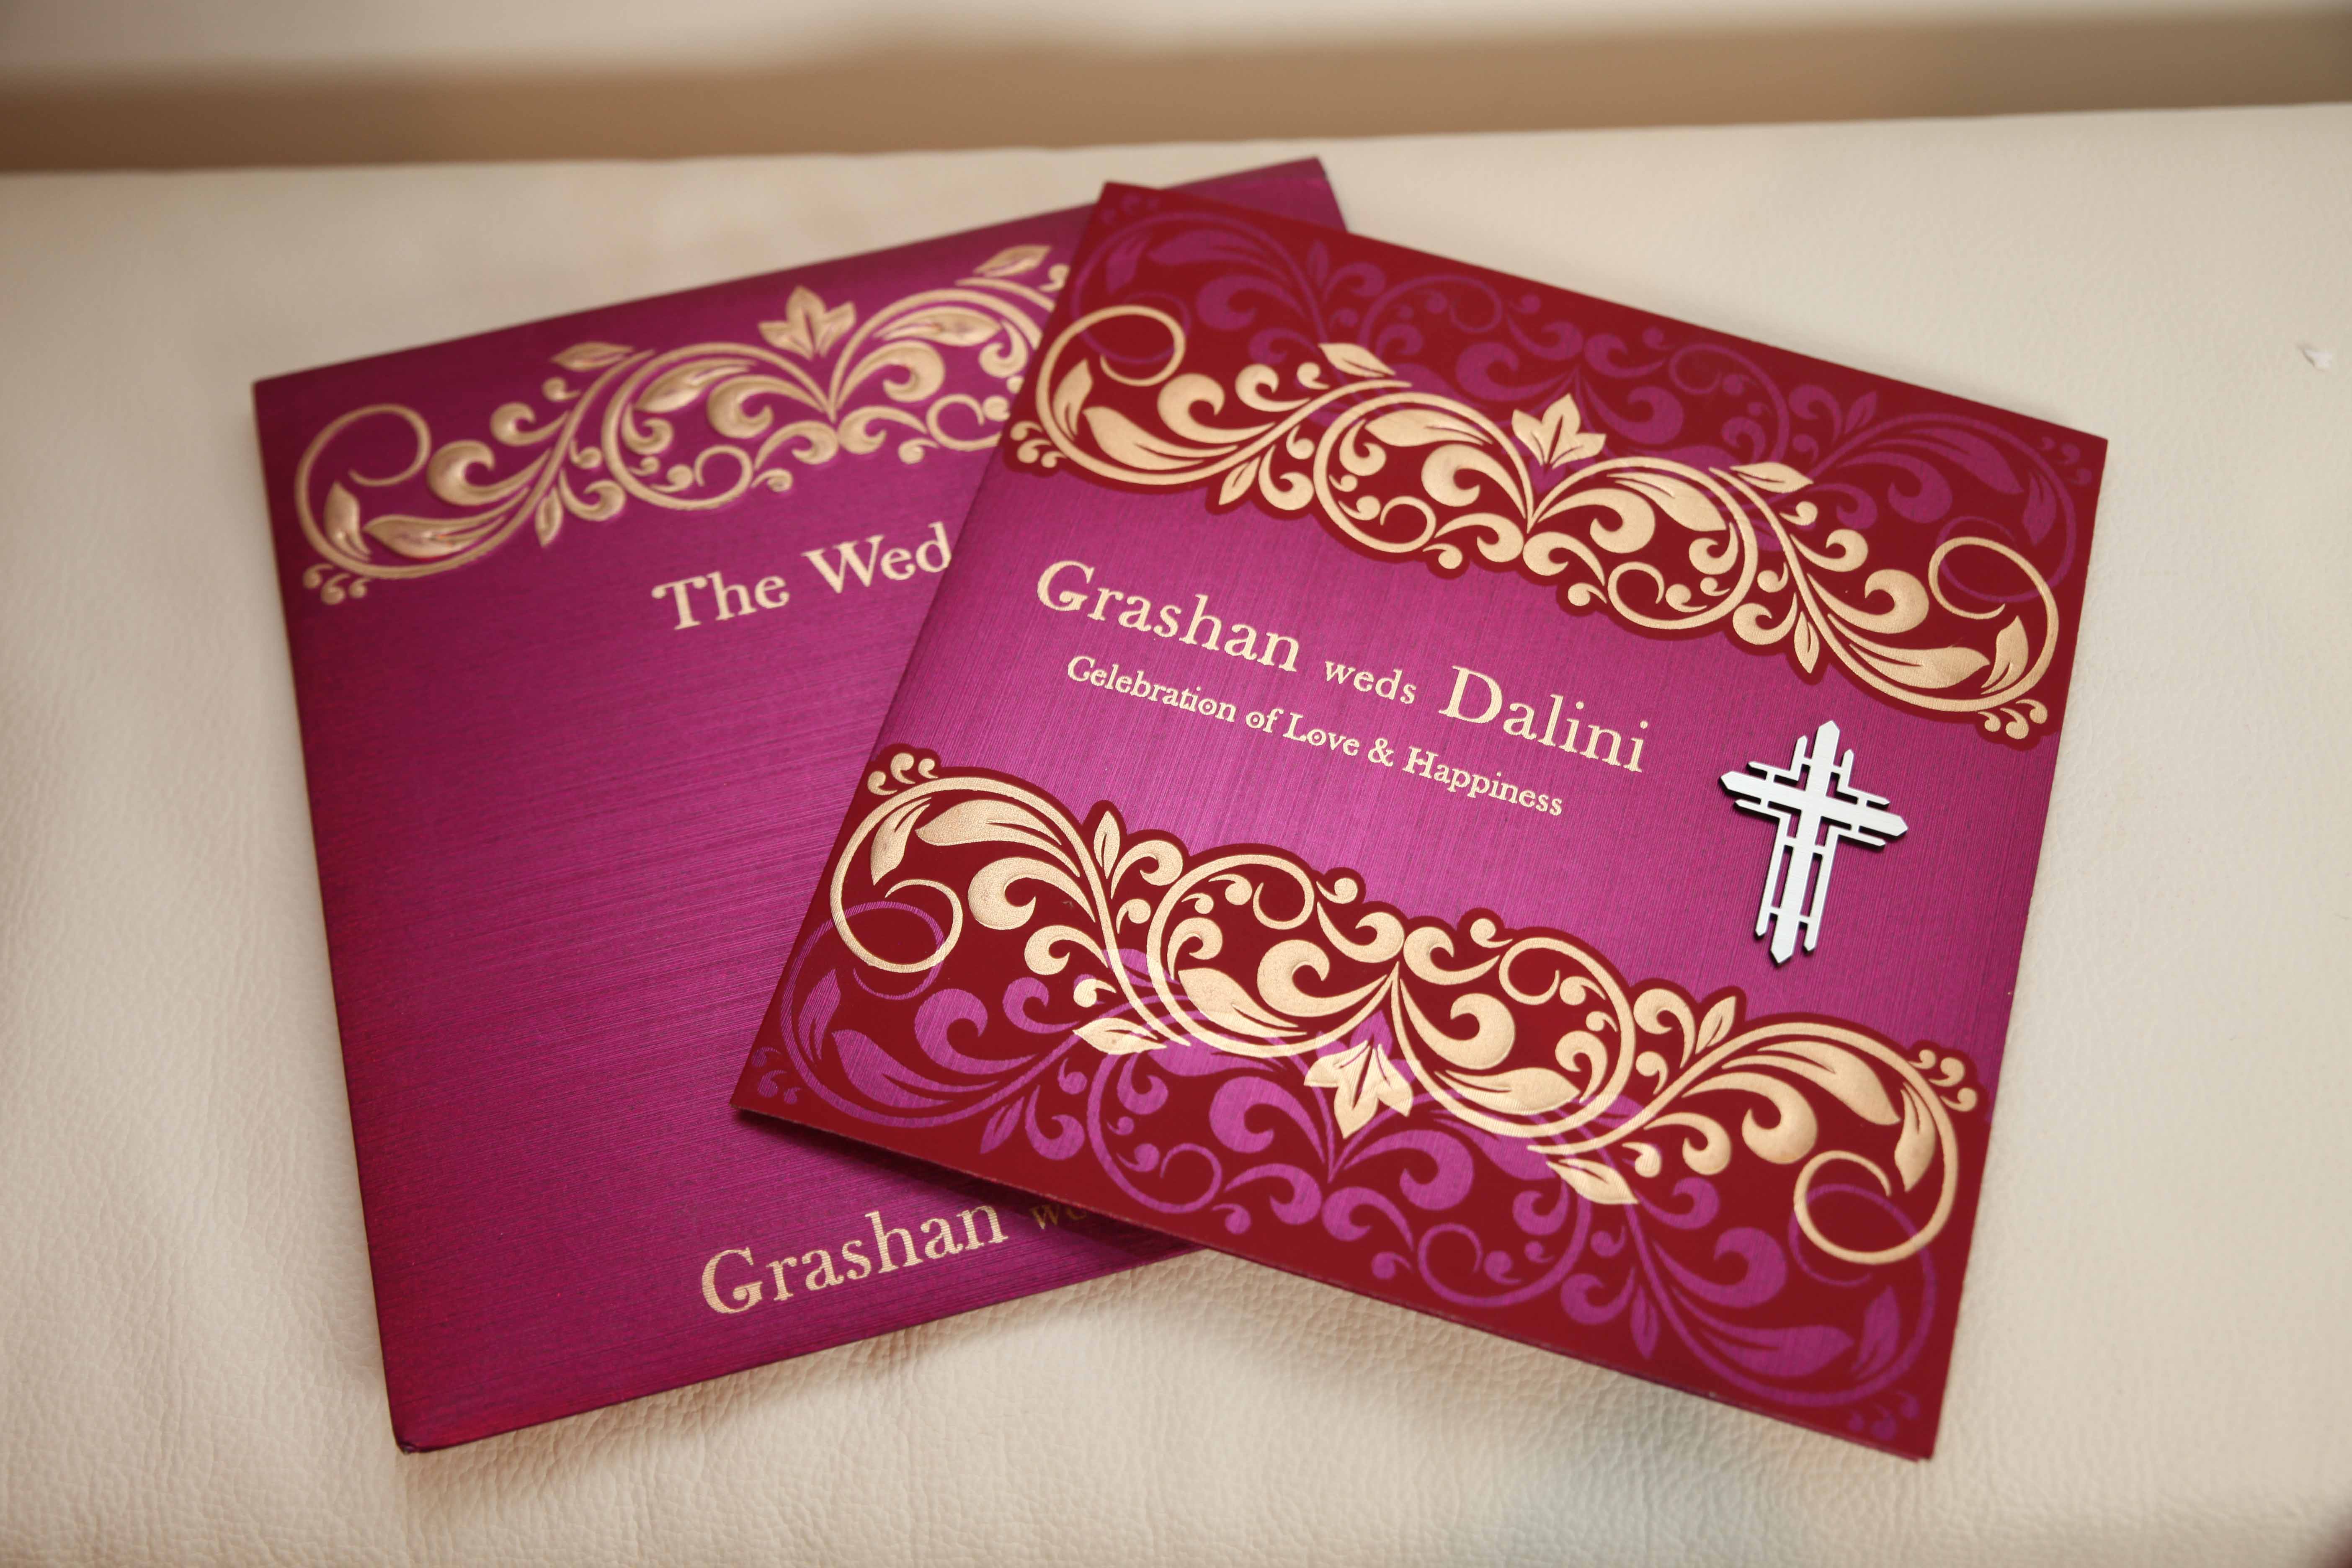 Hindu wedding Cards is a well known brand in the UK